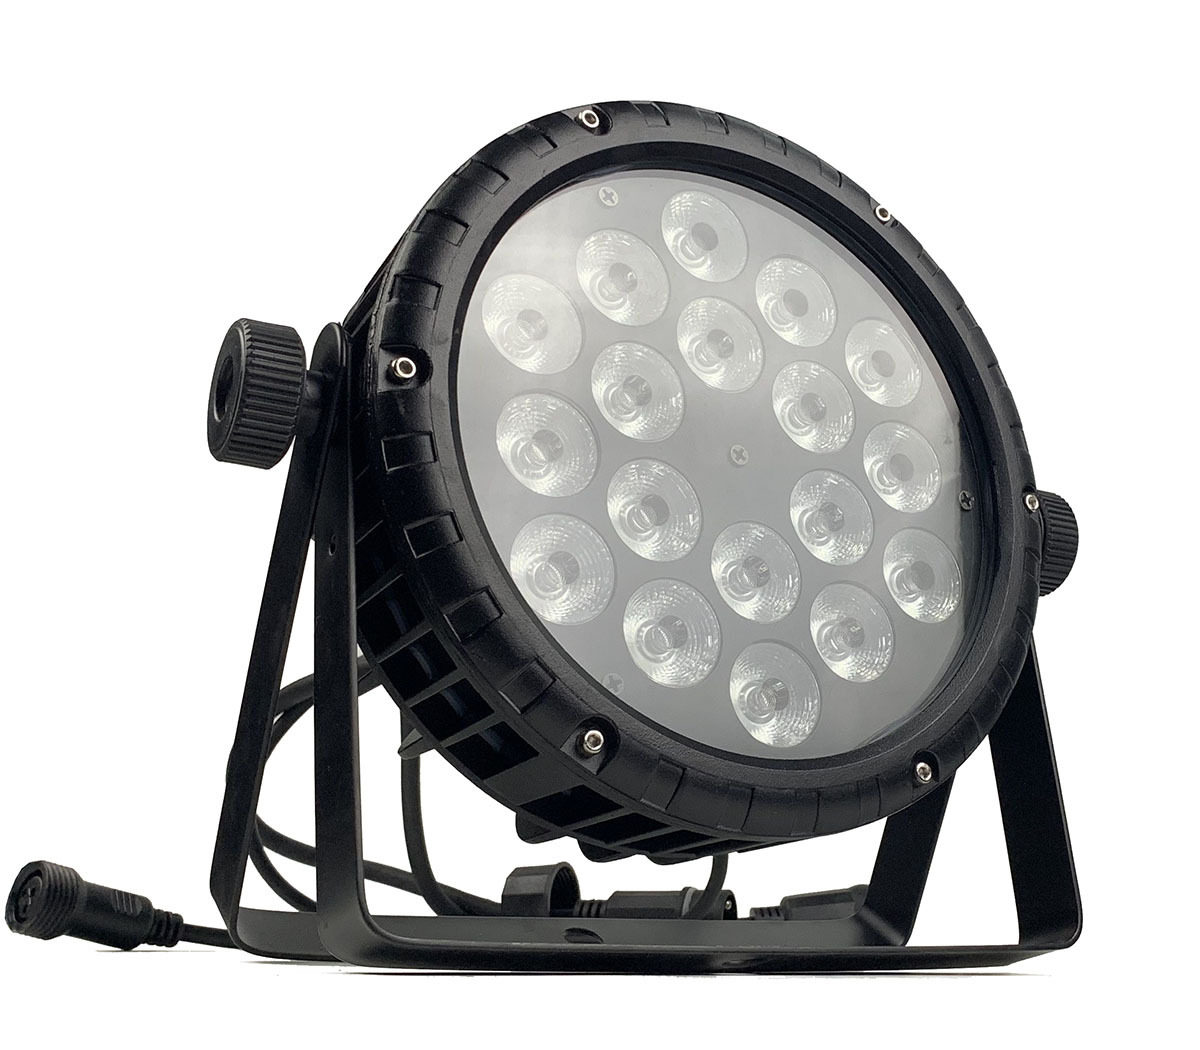 Outdoor 18X15W RGBWA 5in1 Led Par Can flat Light HS-P64-1815Out - Led stage light - 1